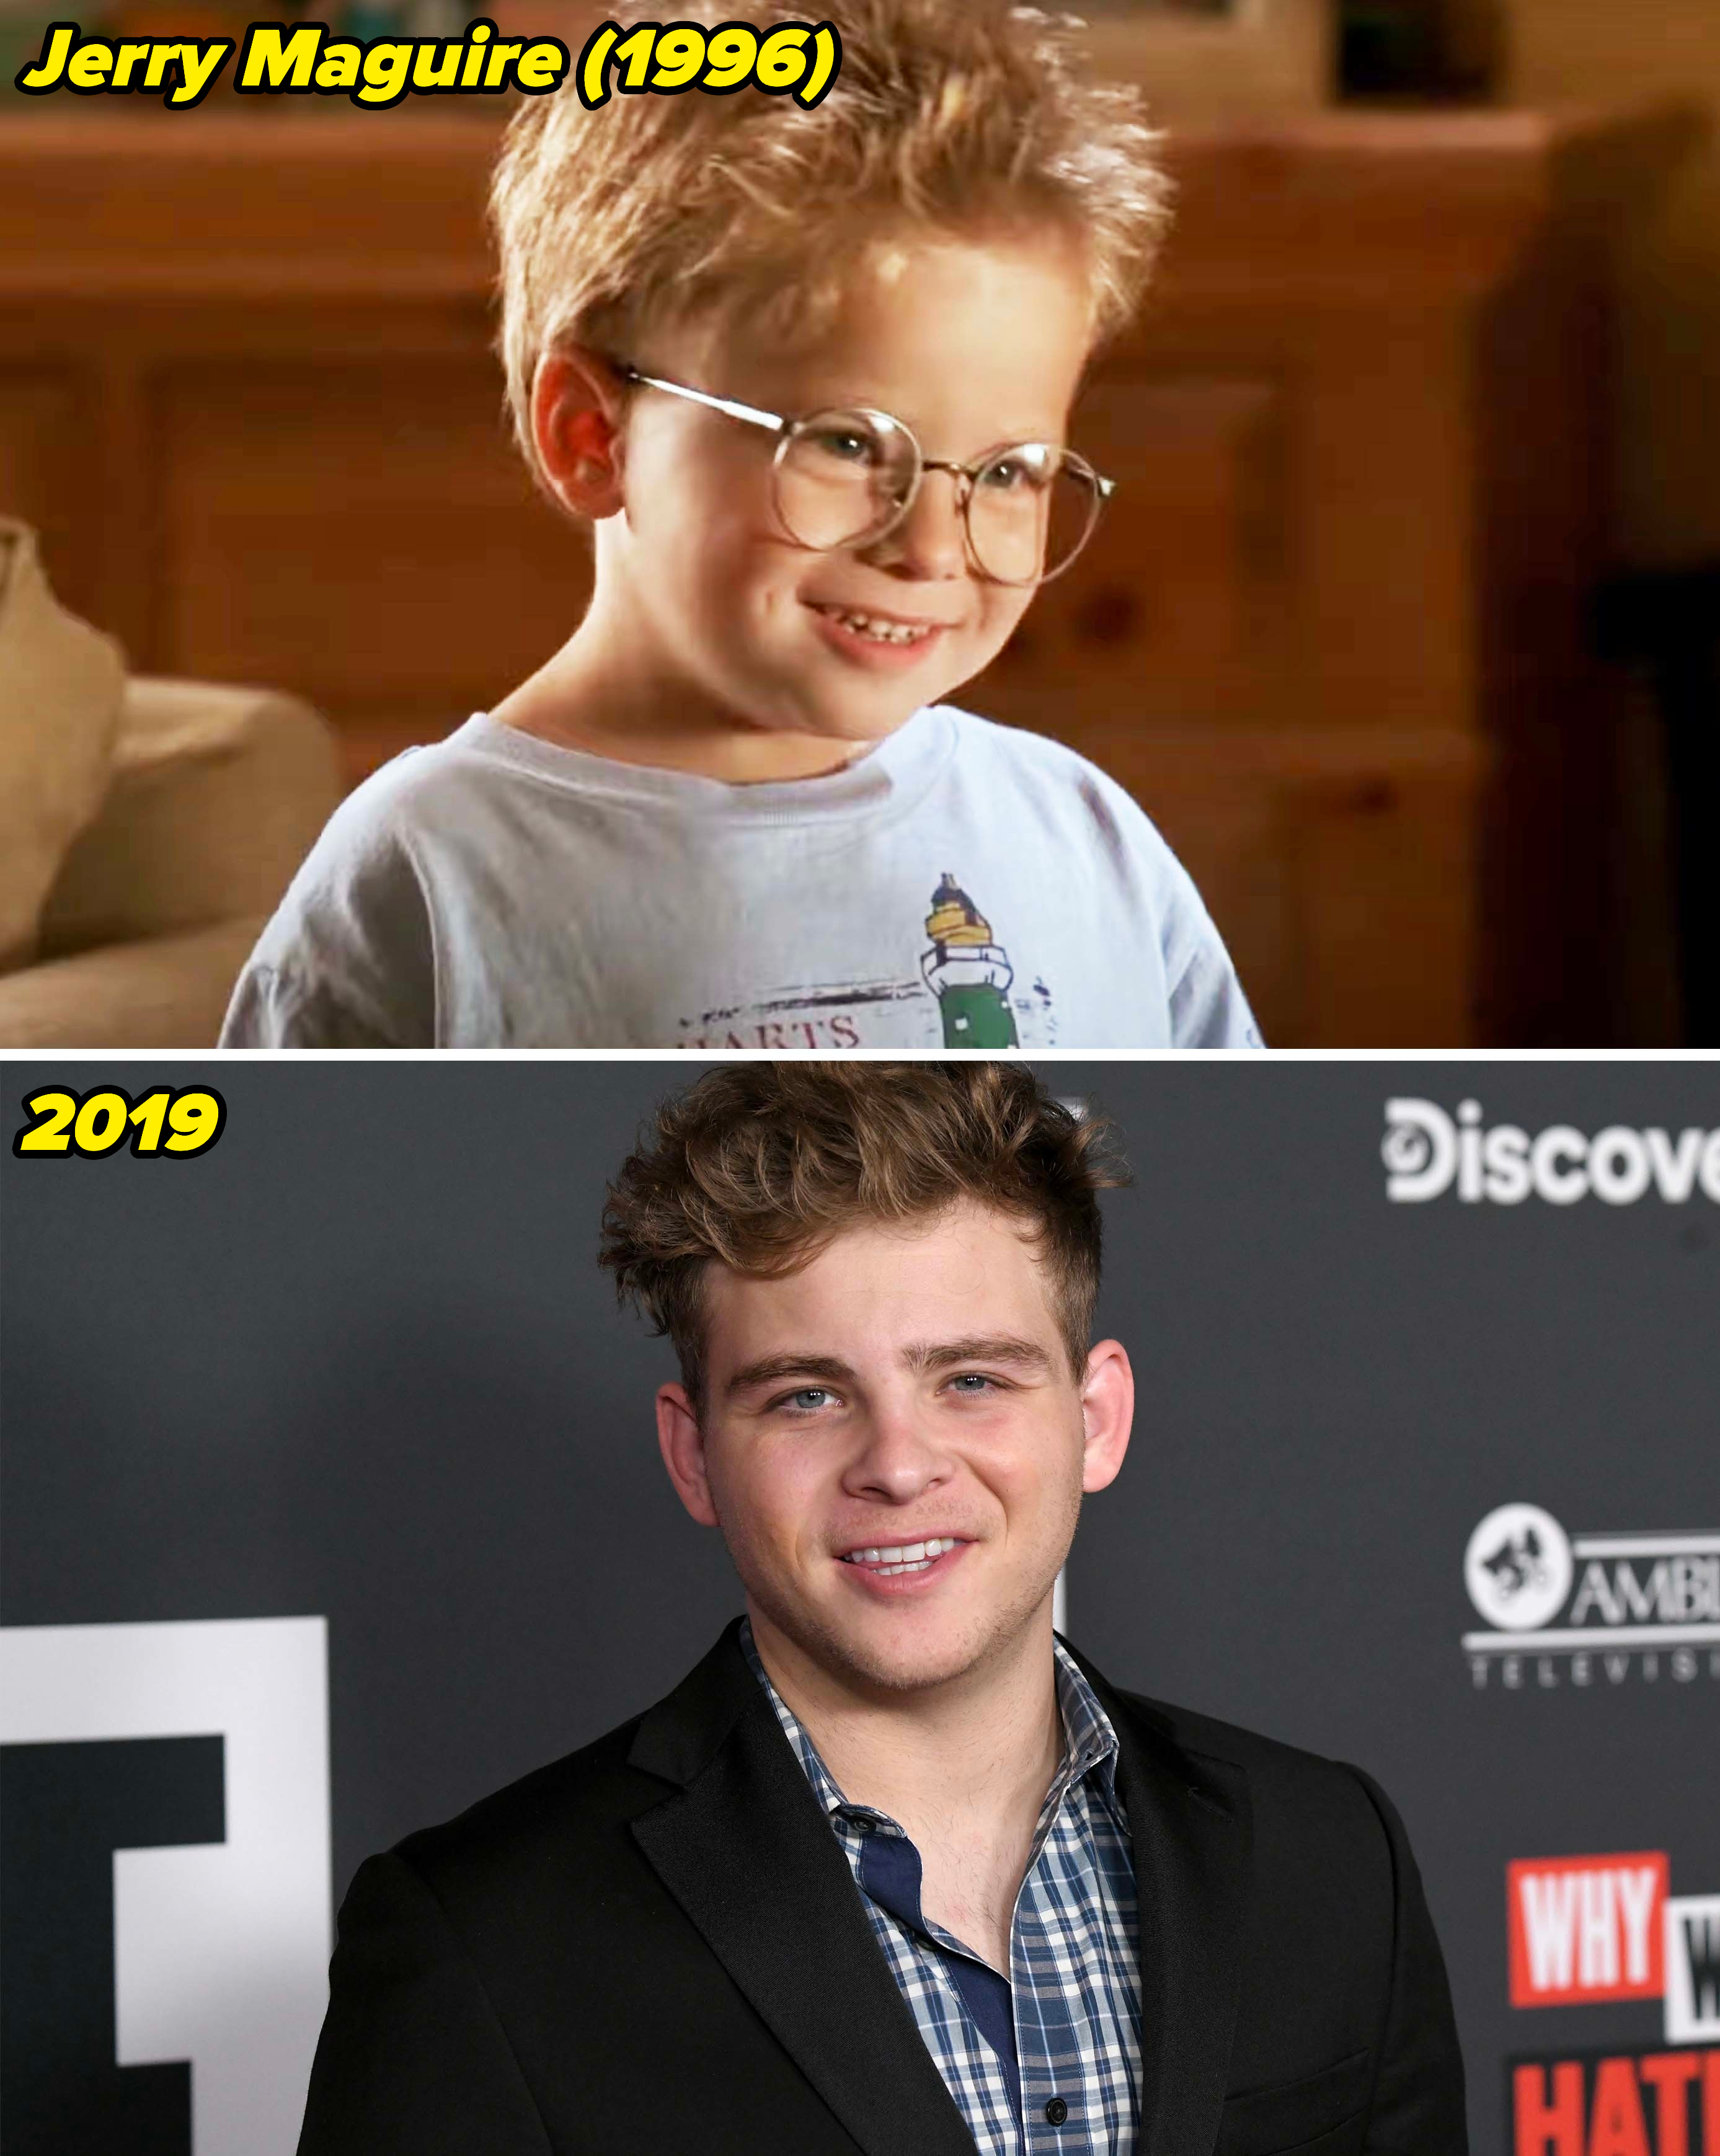 Jonathan in Jerry Maguire in 1996 and in 2019 at a media event